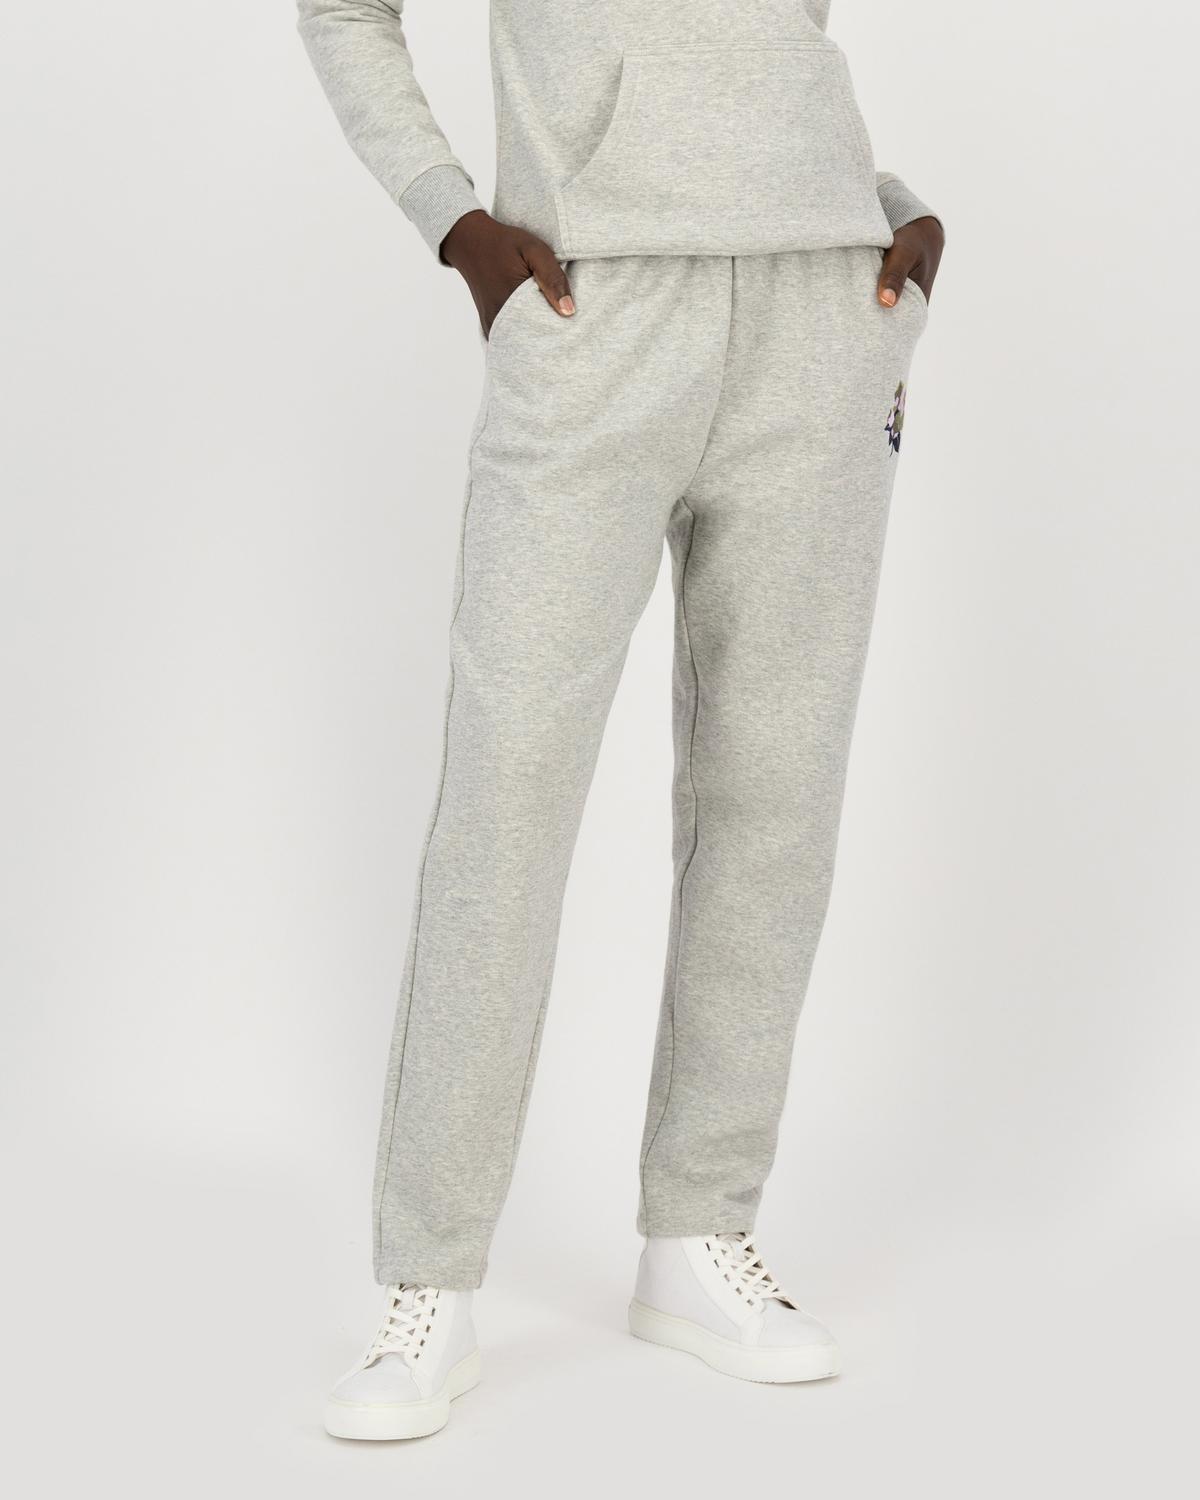 Aveline Knit Joggers - Poetry Clothing Store